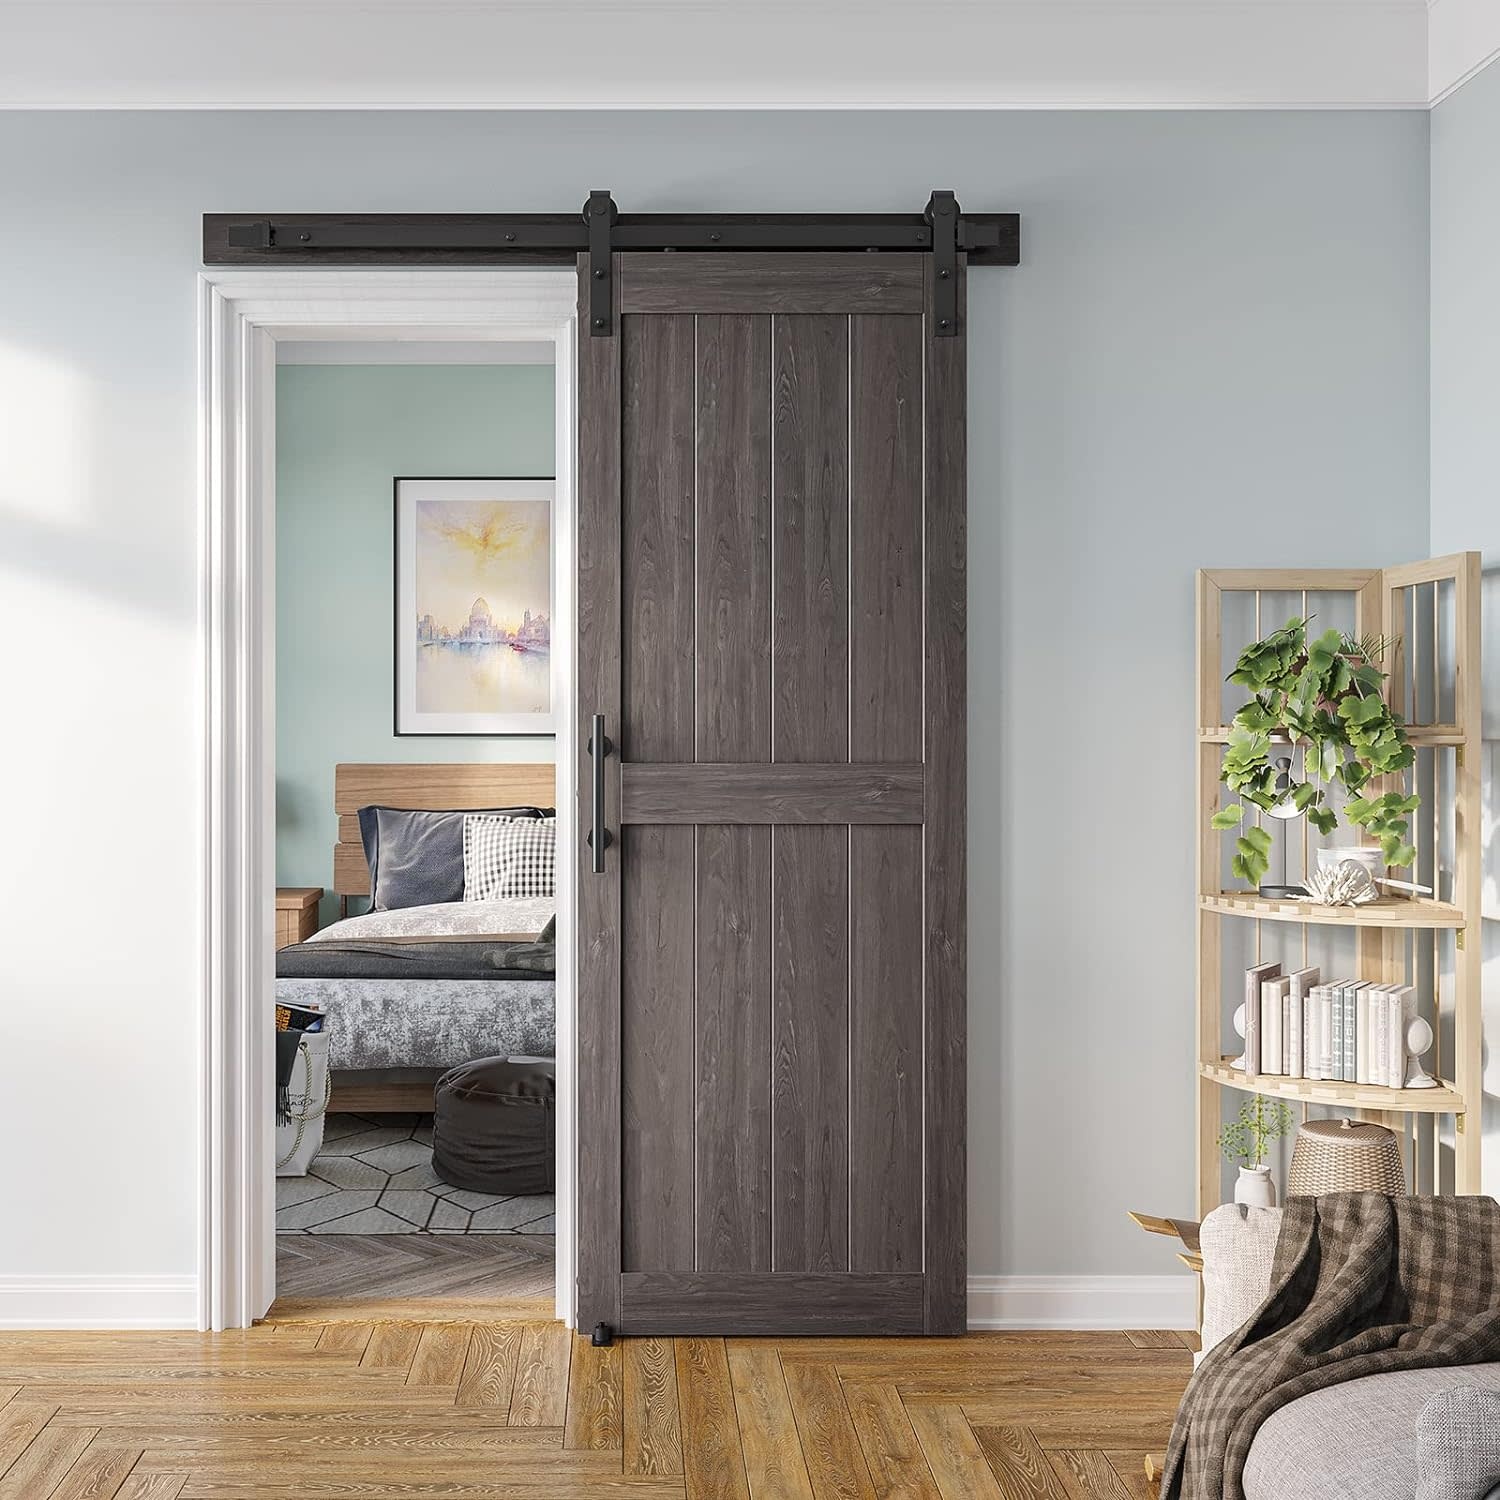 S&Z TOPHAND 36 in. x 84 in. Unfinished British Brace Knotty Barn Door with 6.6ft Sliding Door Hardware kit/solid wood/sliding